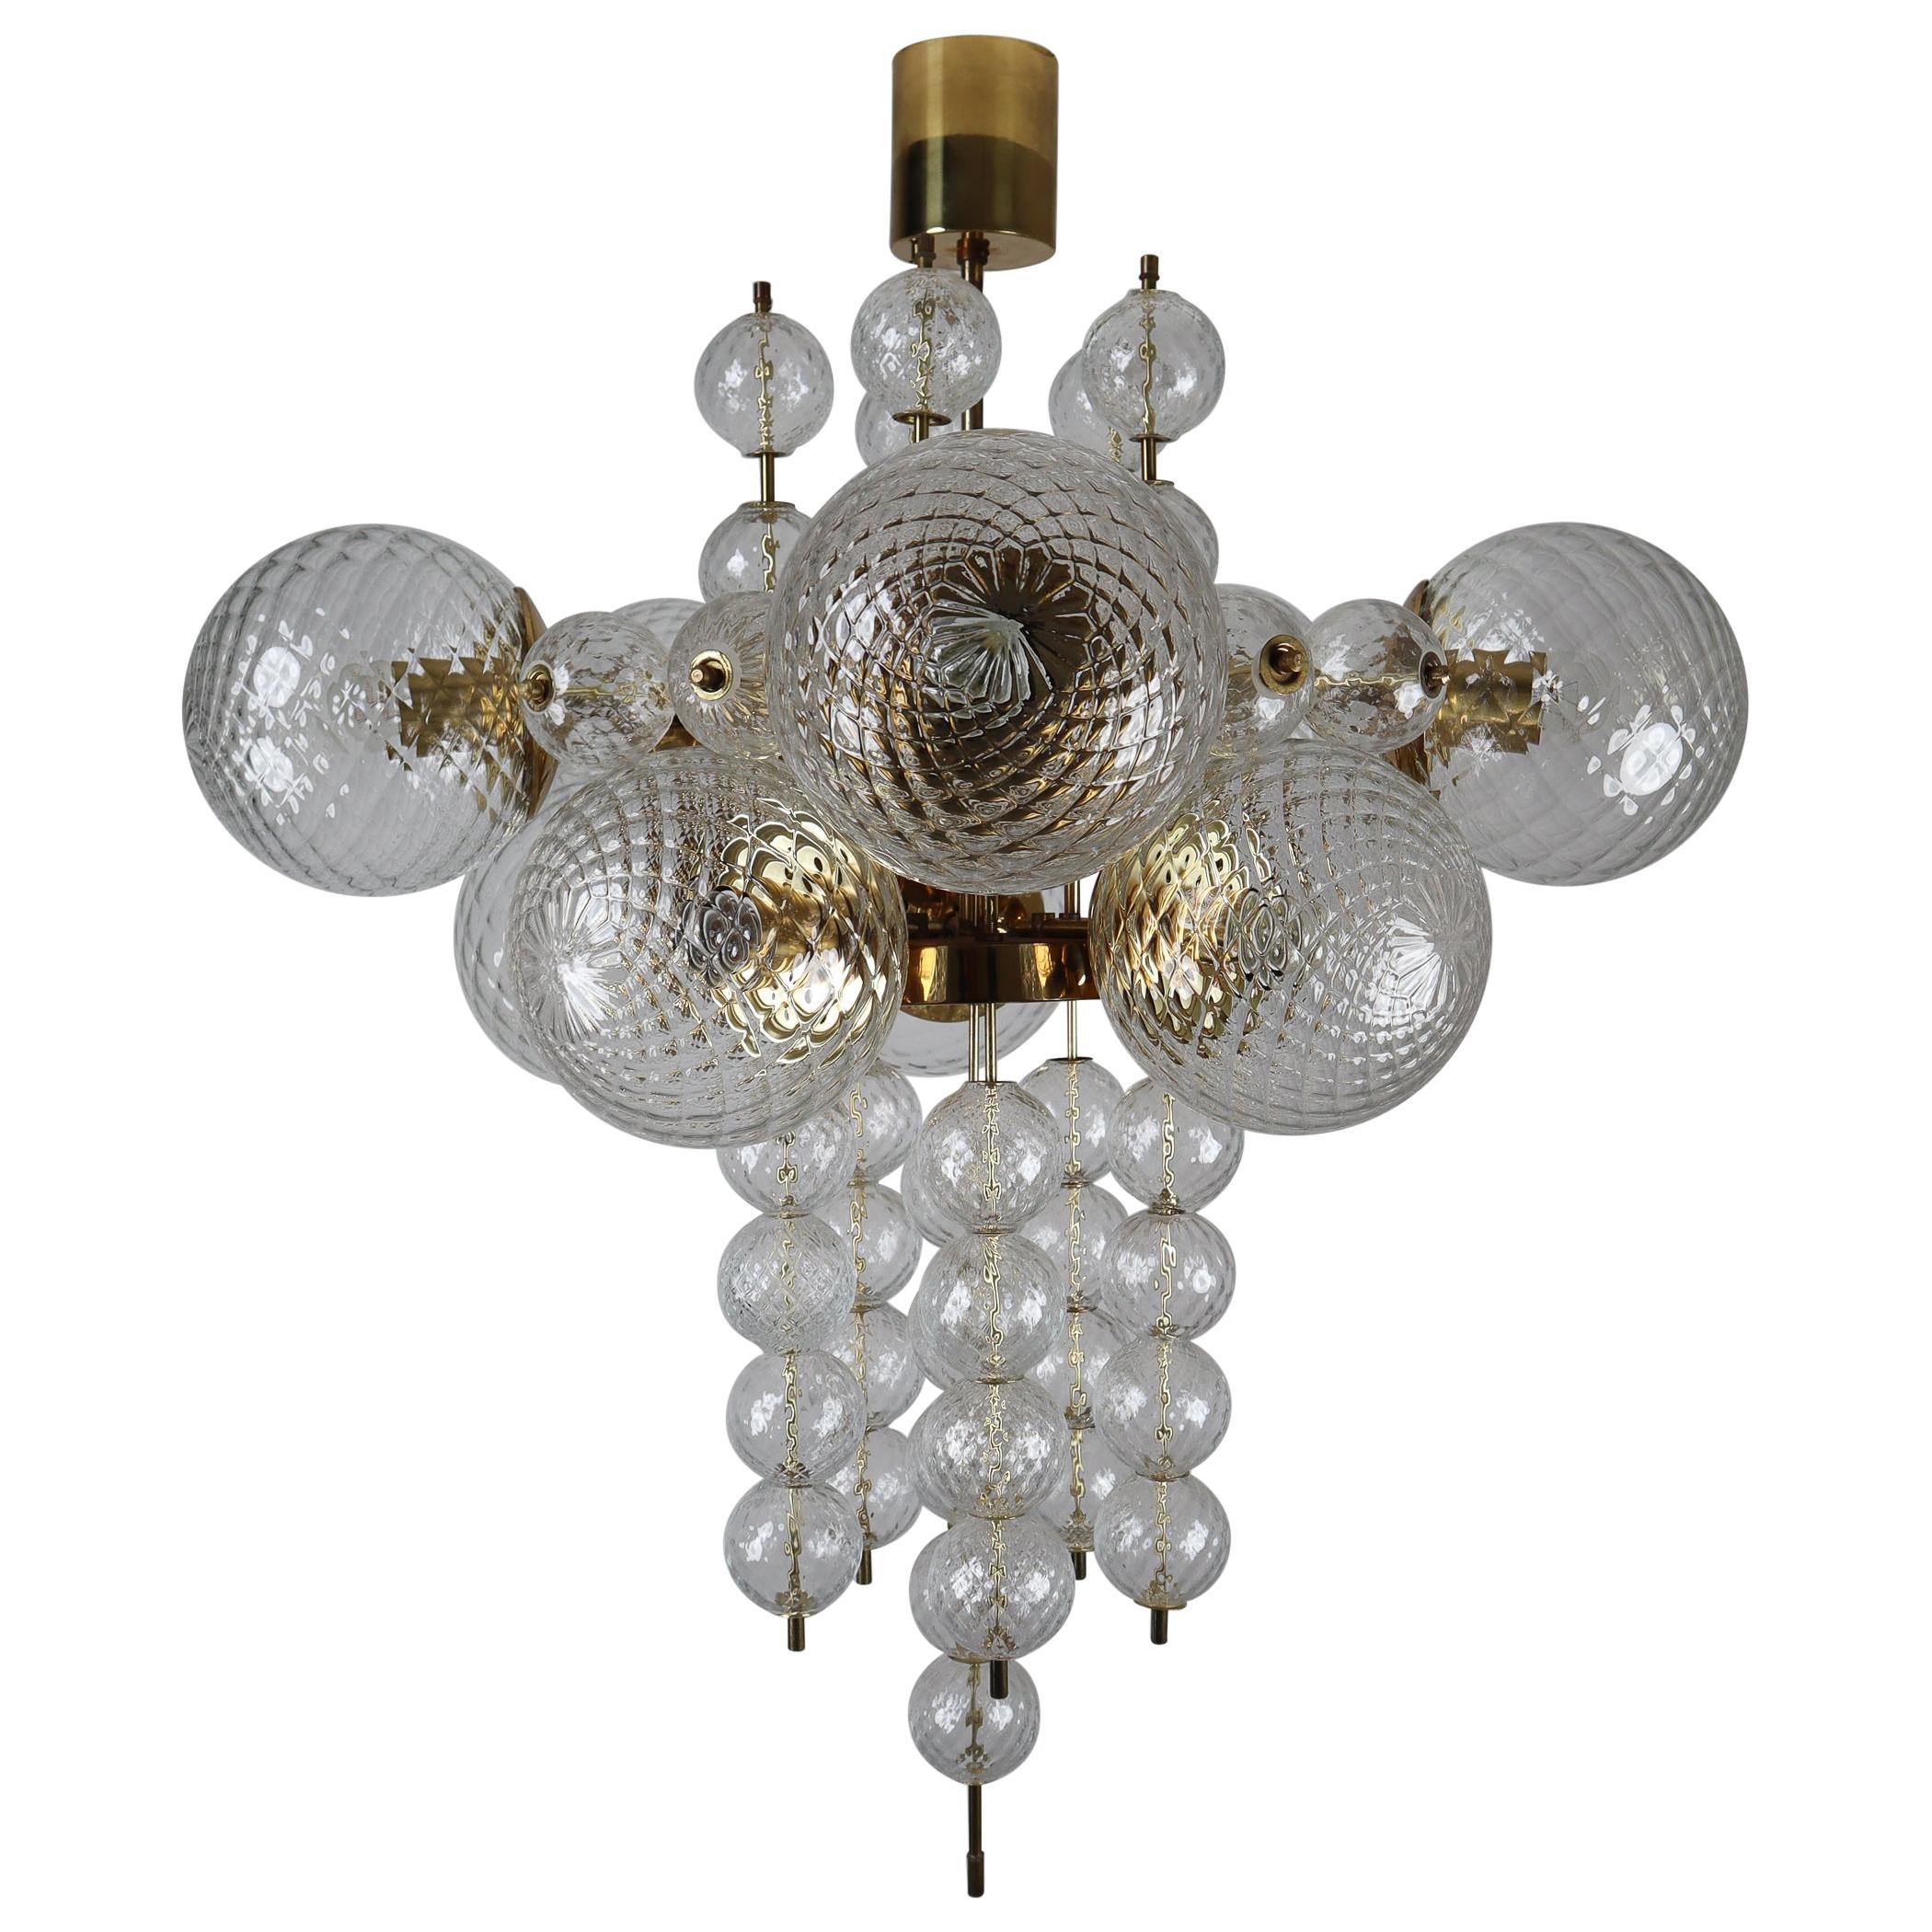 Large Midcentury Chandelier with Brass Fixture and Structured Glass Europe 1970s